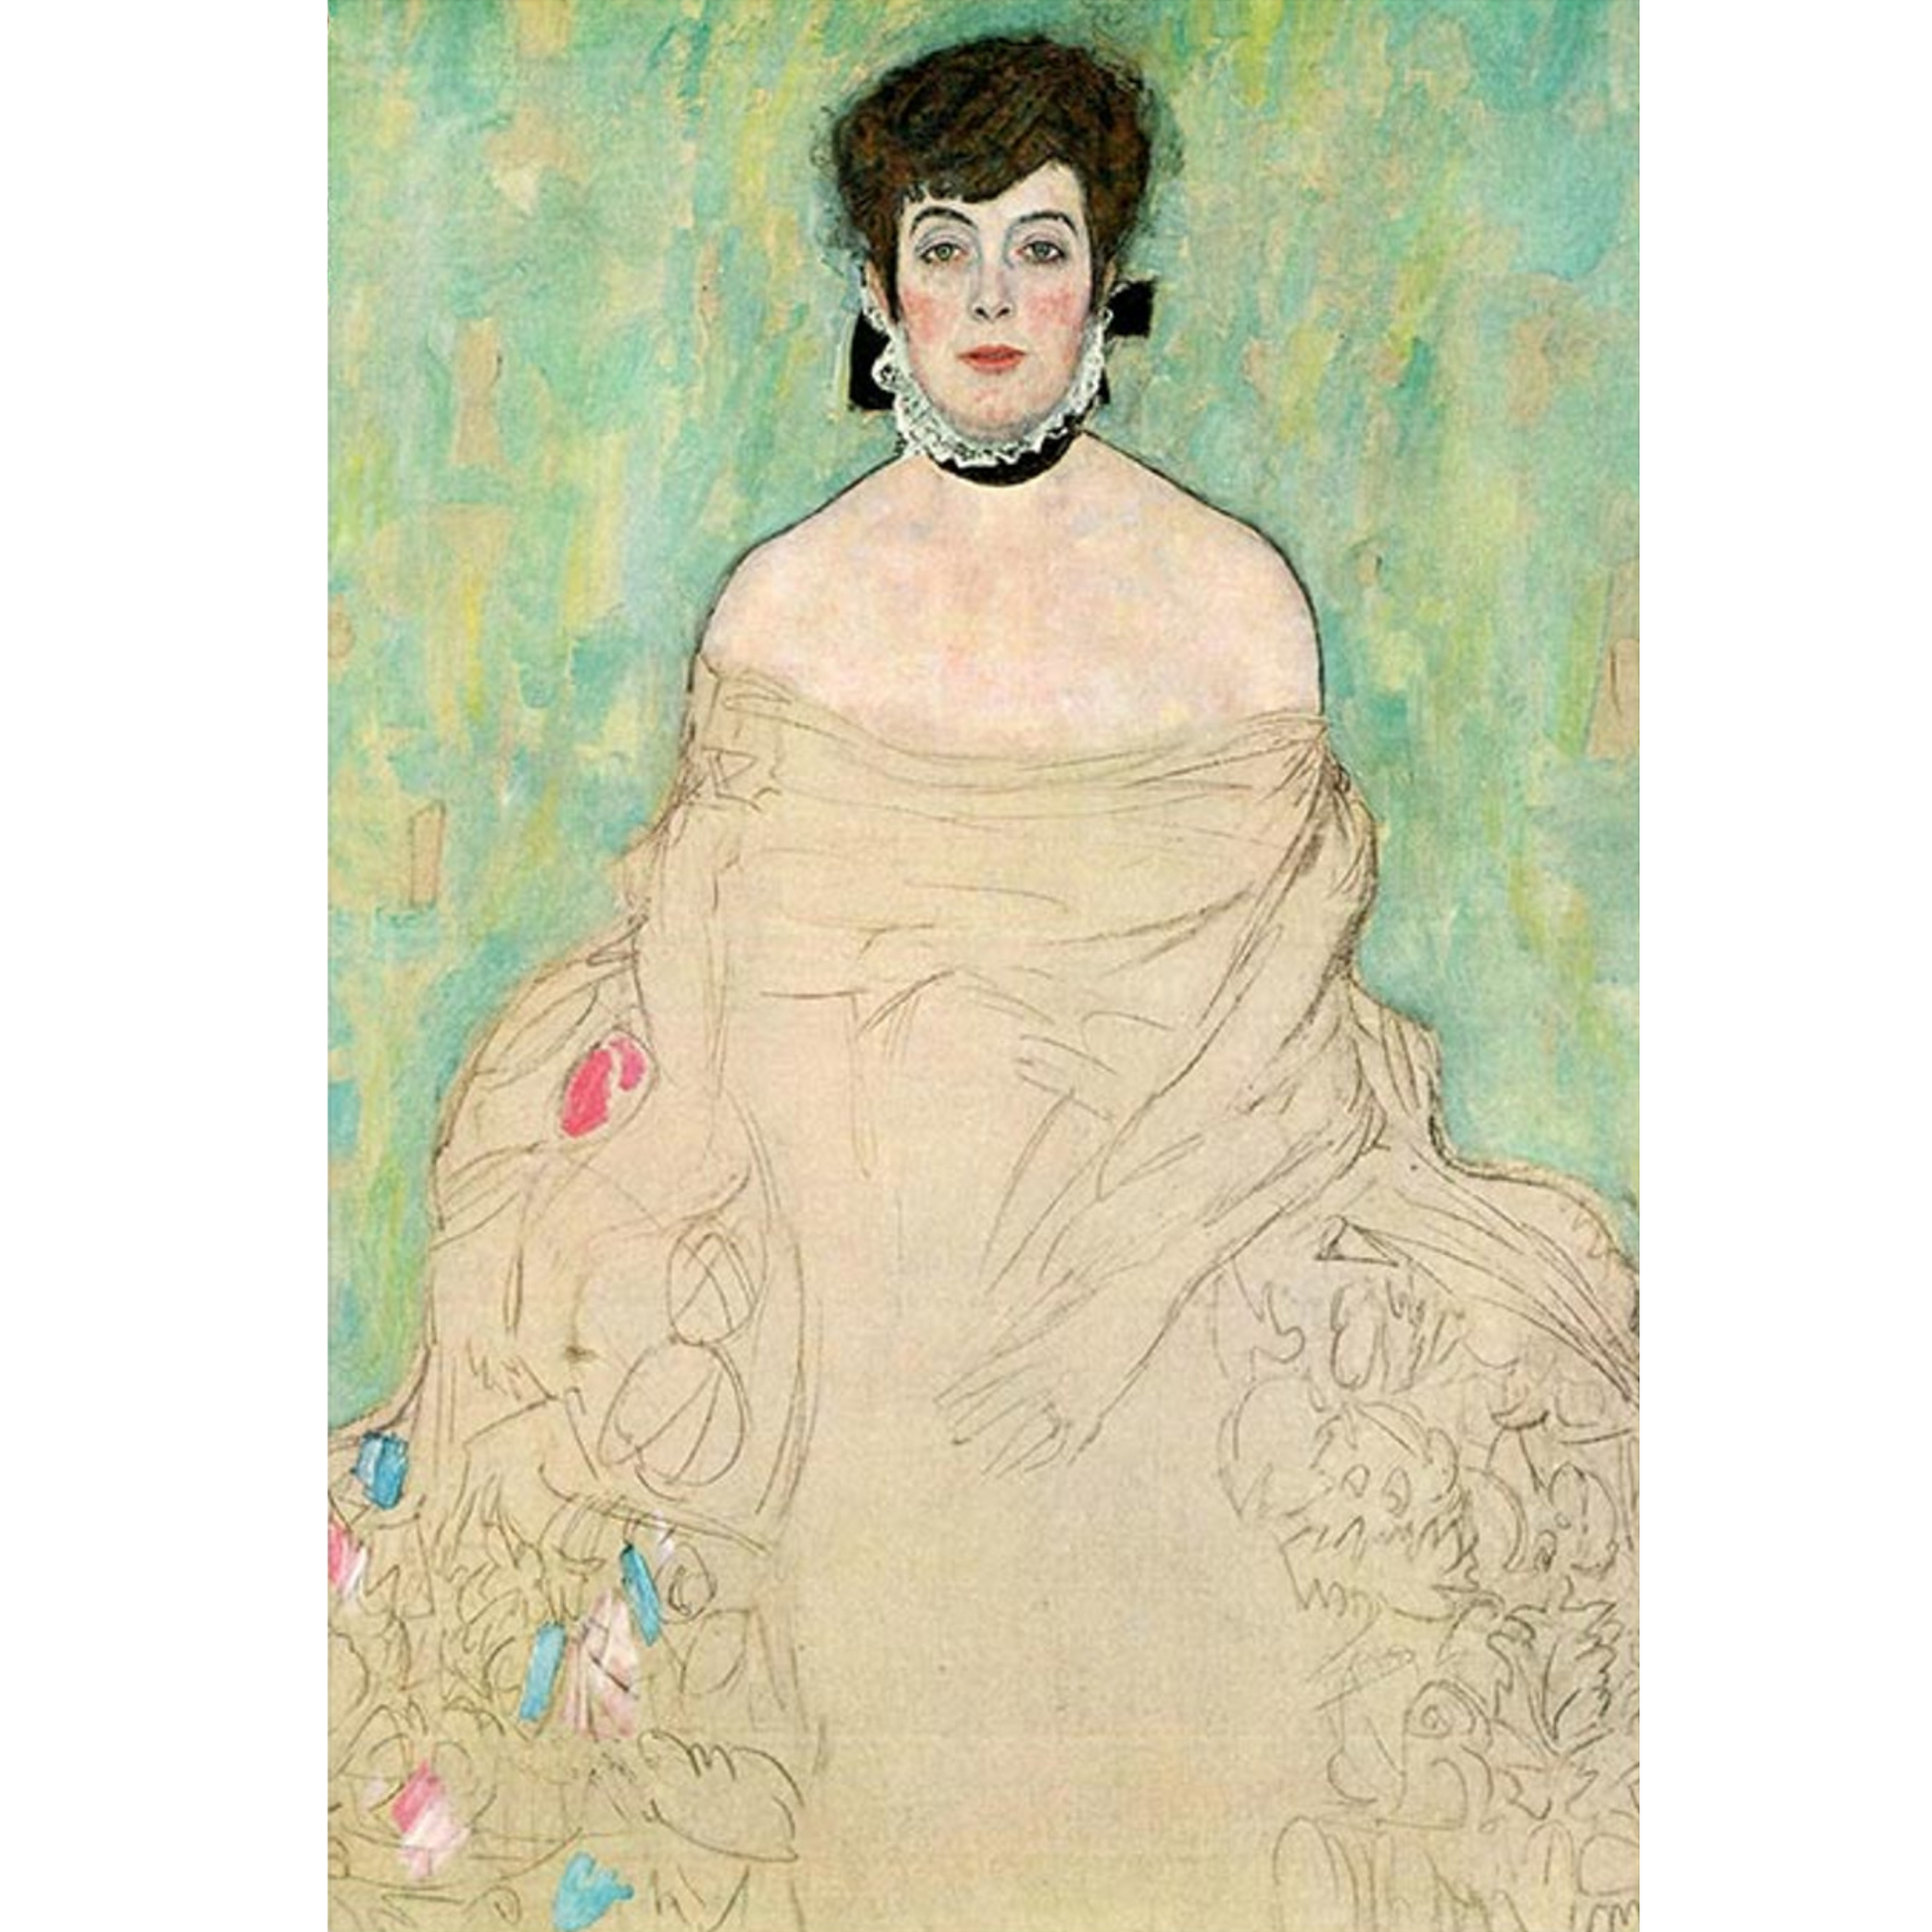 "Portrait of Amalie Zuckerkandl" by Klimt-reproduction print on decoupage rice paper. Available in size A4 at Milton's Daughter.